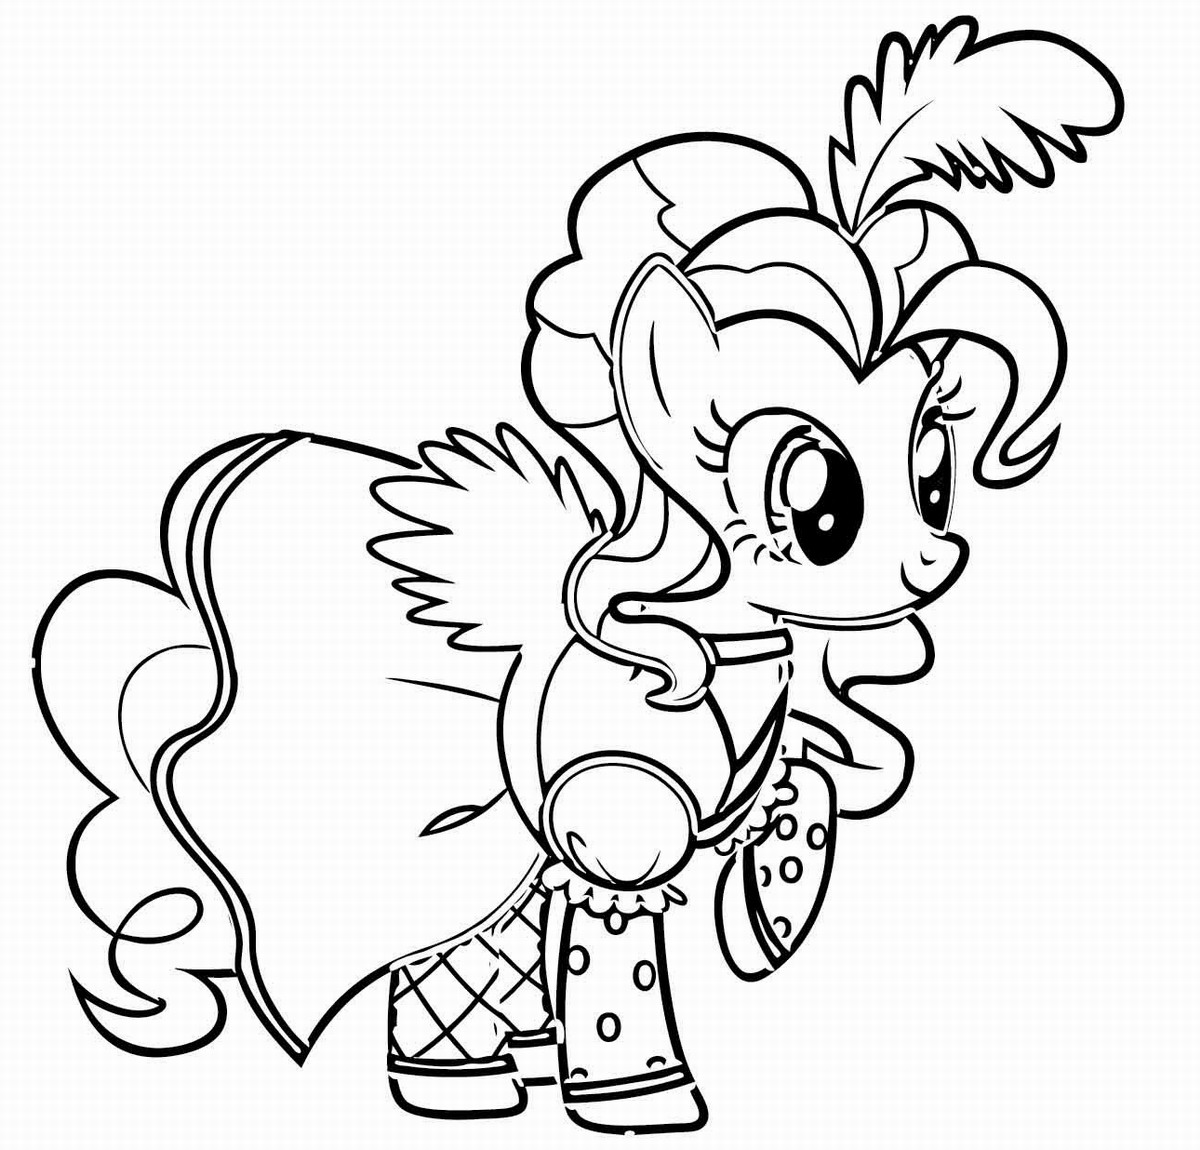 my-little-pony-coloring-6